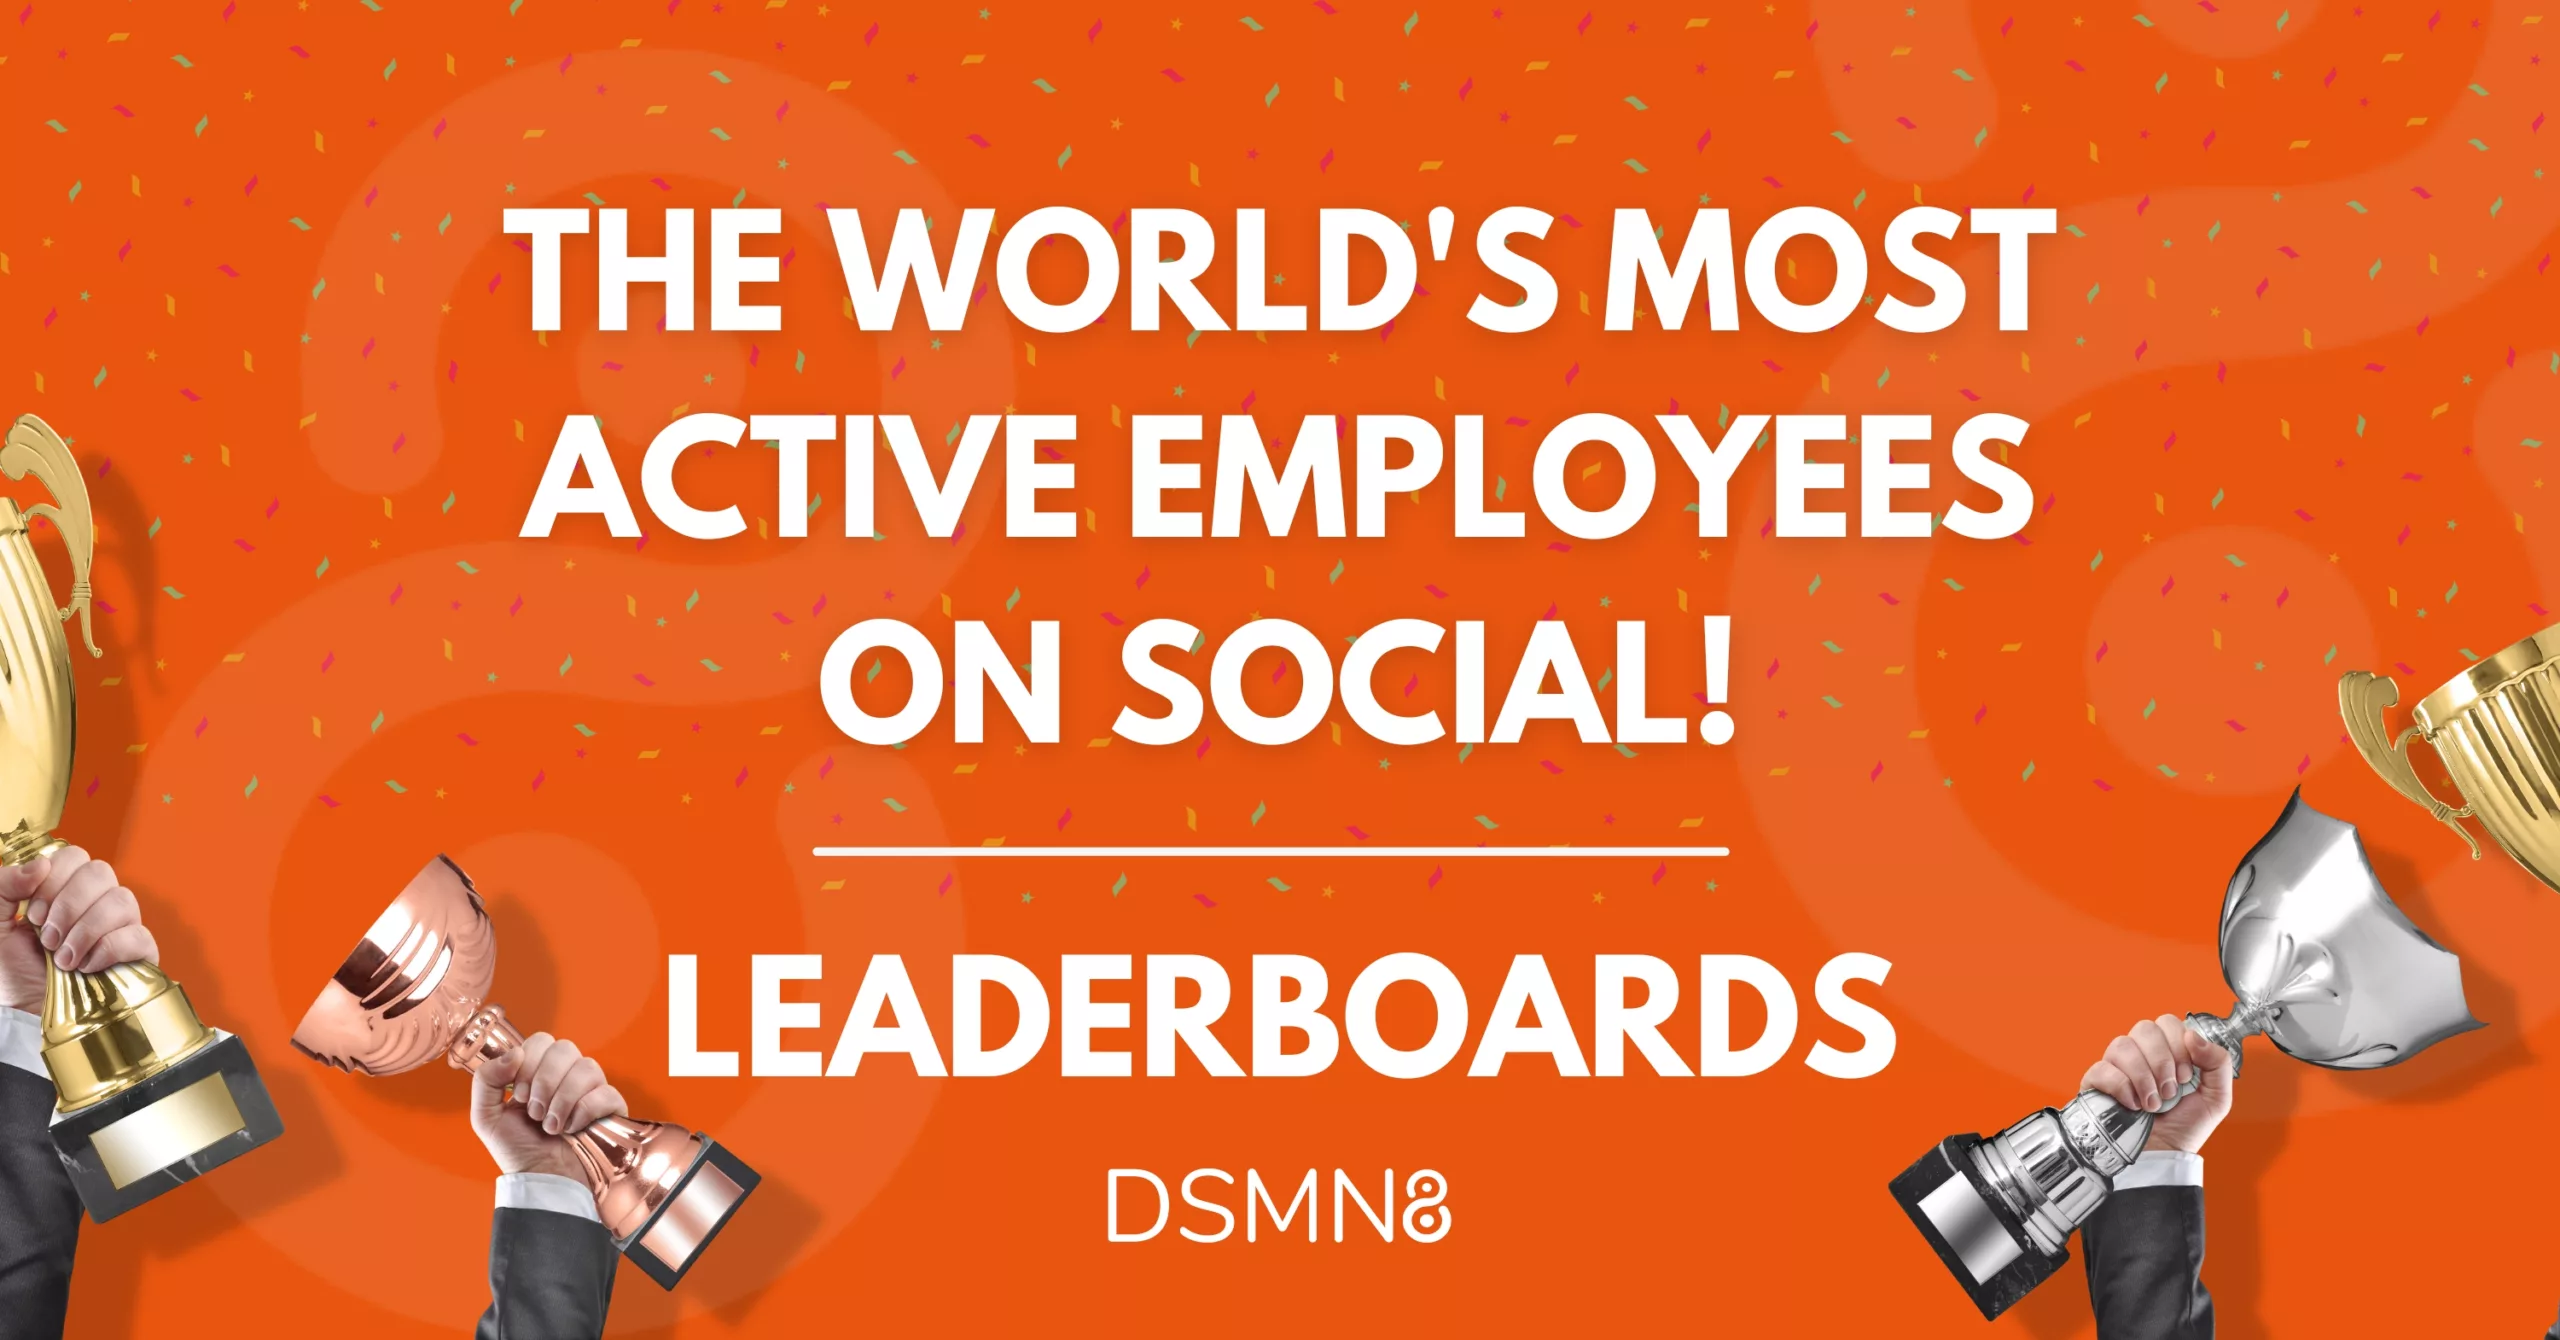 Leaderboards & Gamification: Make Sharing Fun - Clearview Social